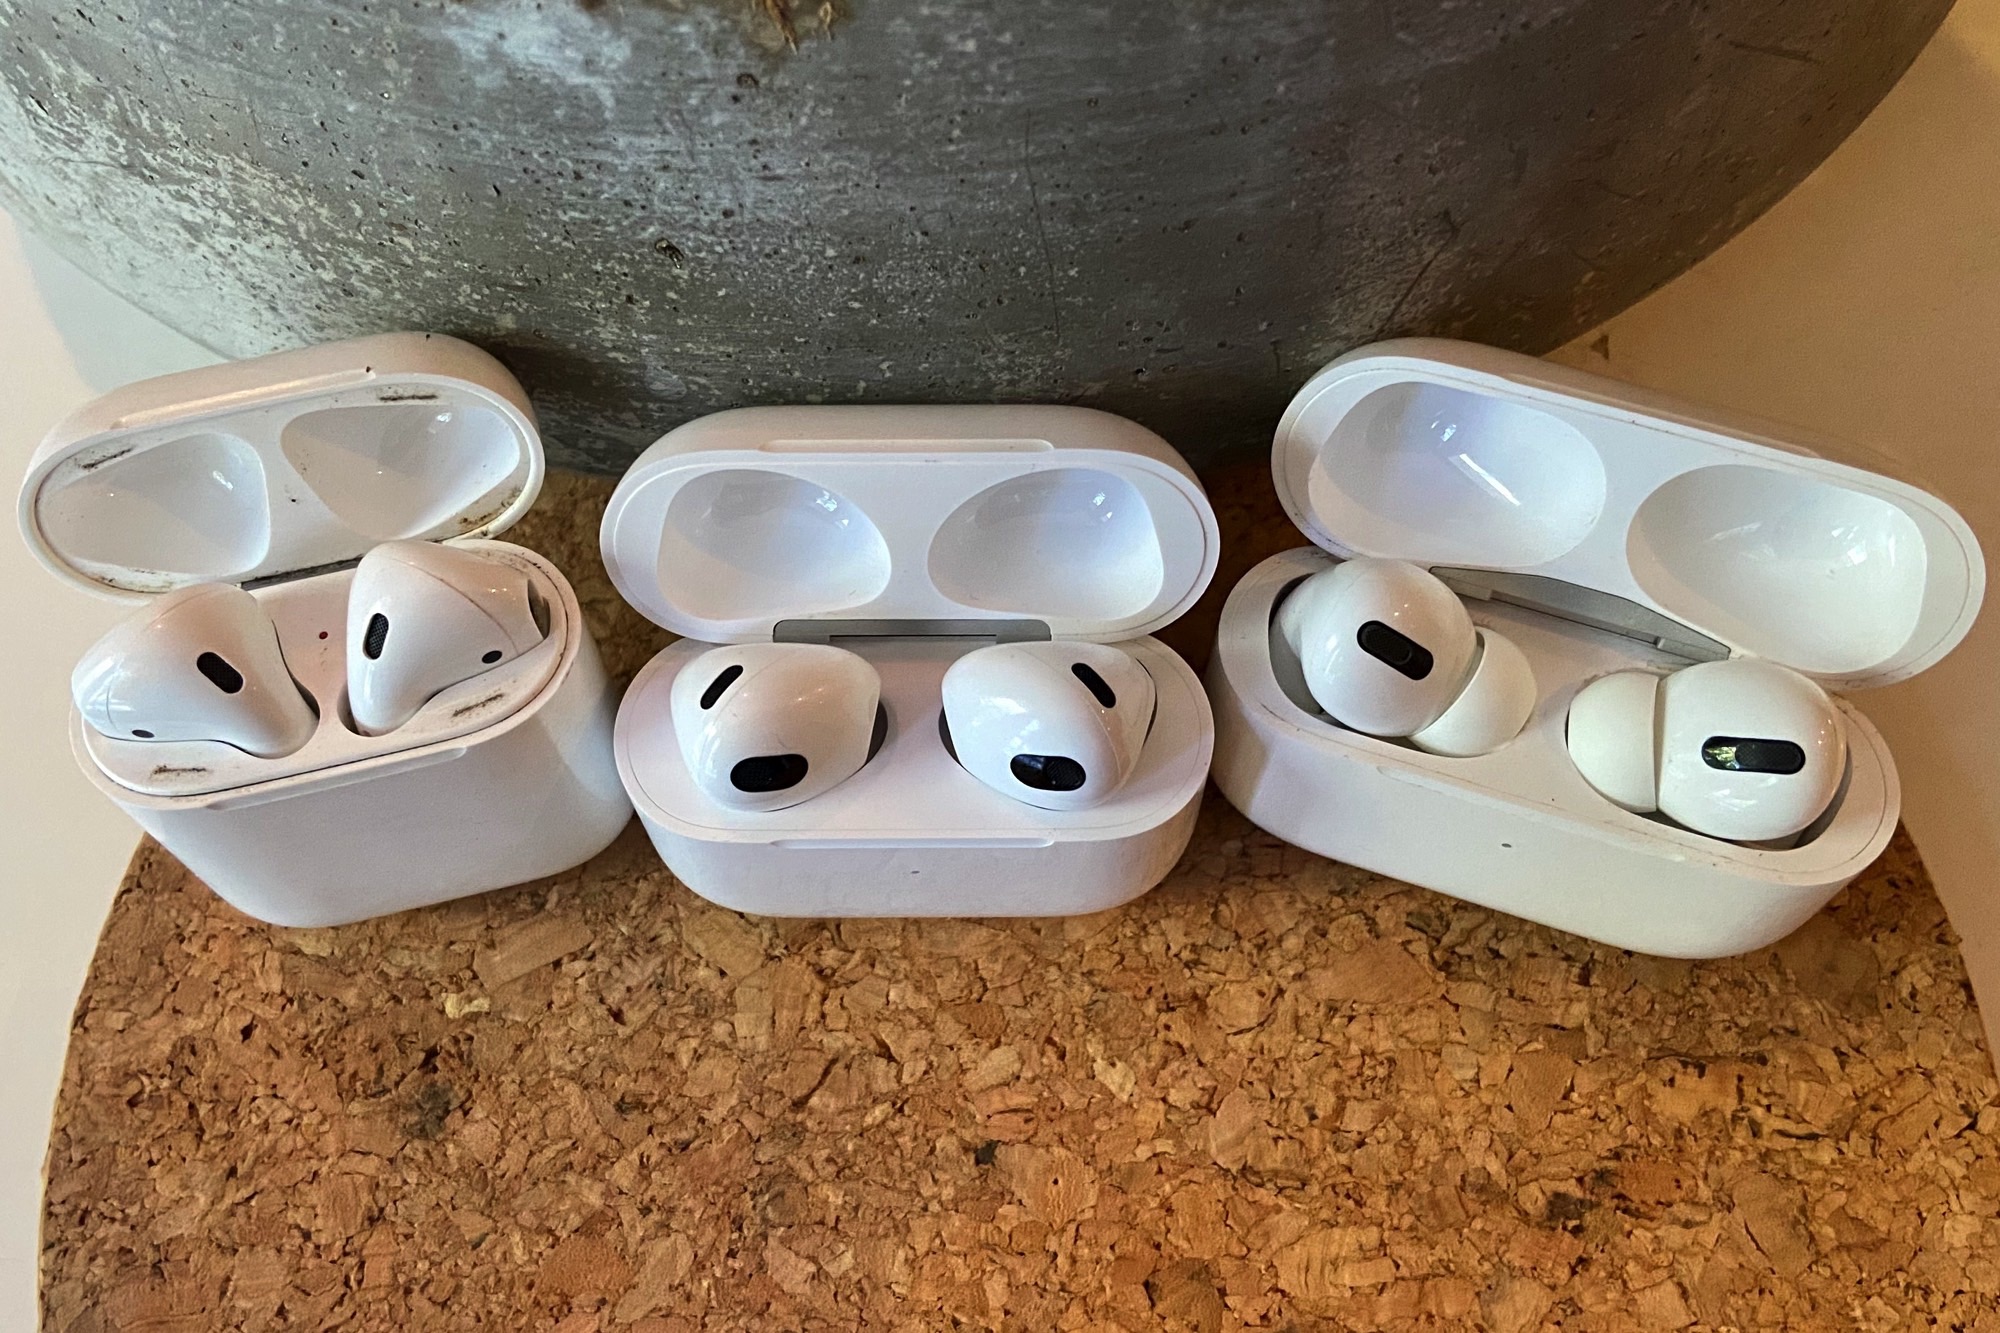 apple airpods 3 review 00010